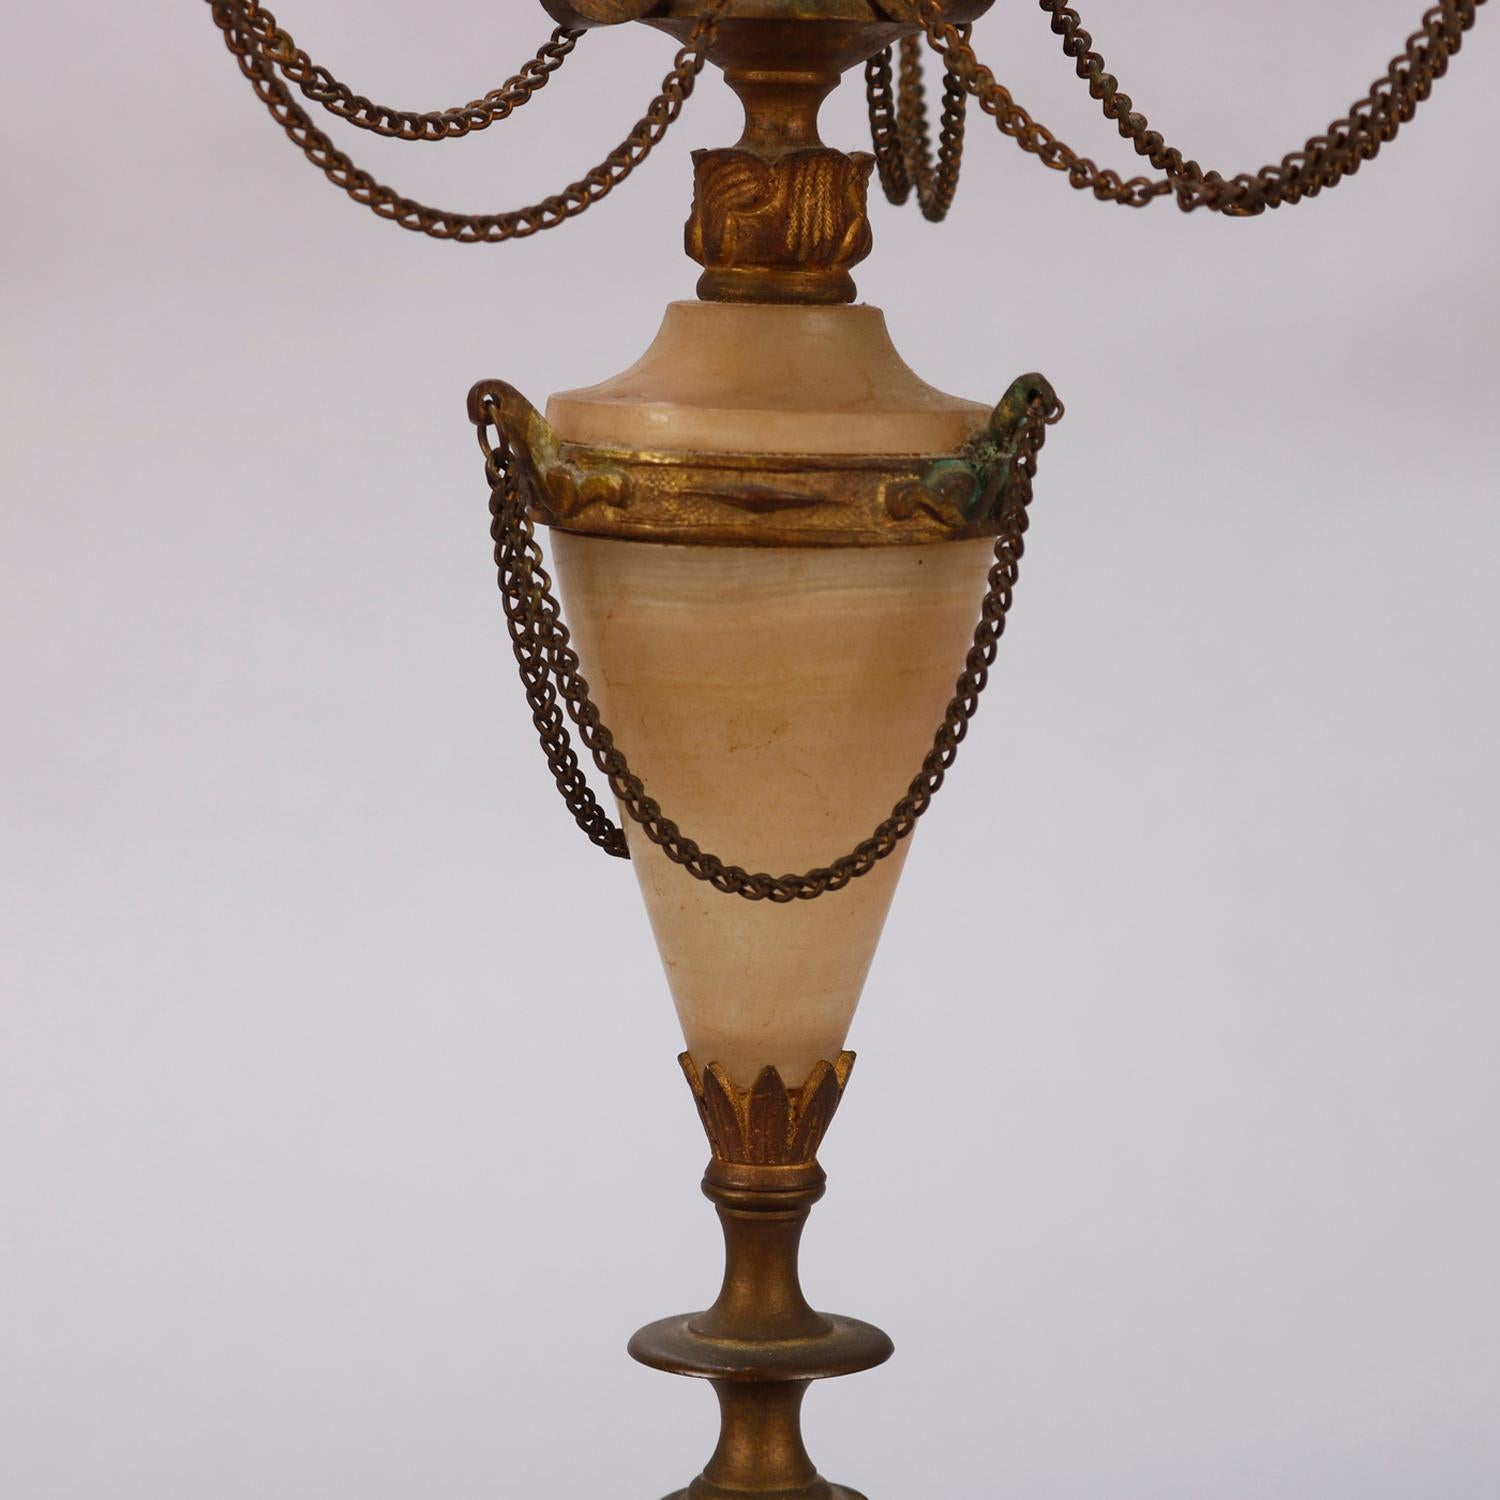 A pair of classical candelabra offer gilt metal foliate form arms with alabaster bobeche and draping chain surmounting drape decorated alabaster urn form column raised on stepped base with cast paw feet, circa 1880

Measures: 18.5